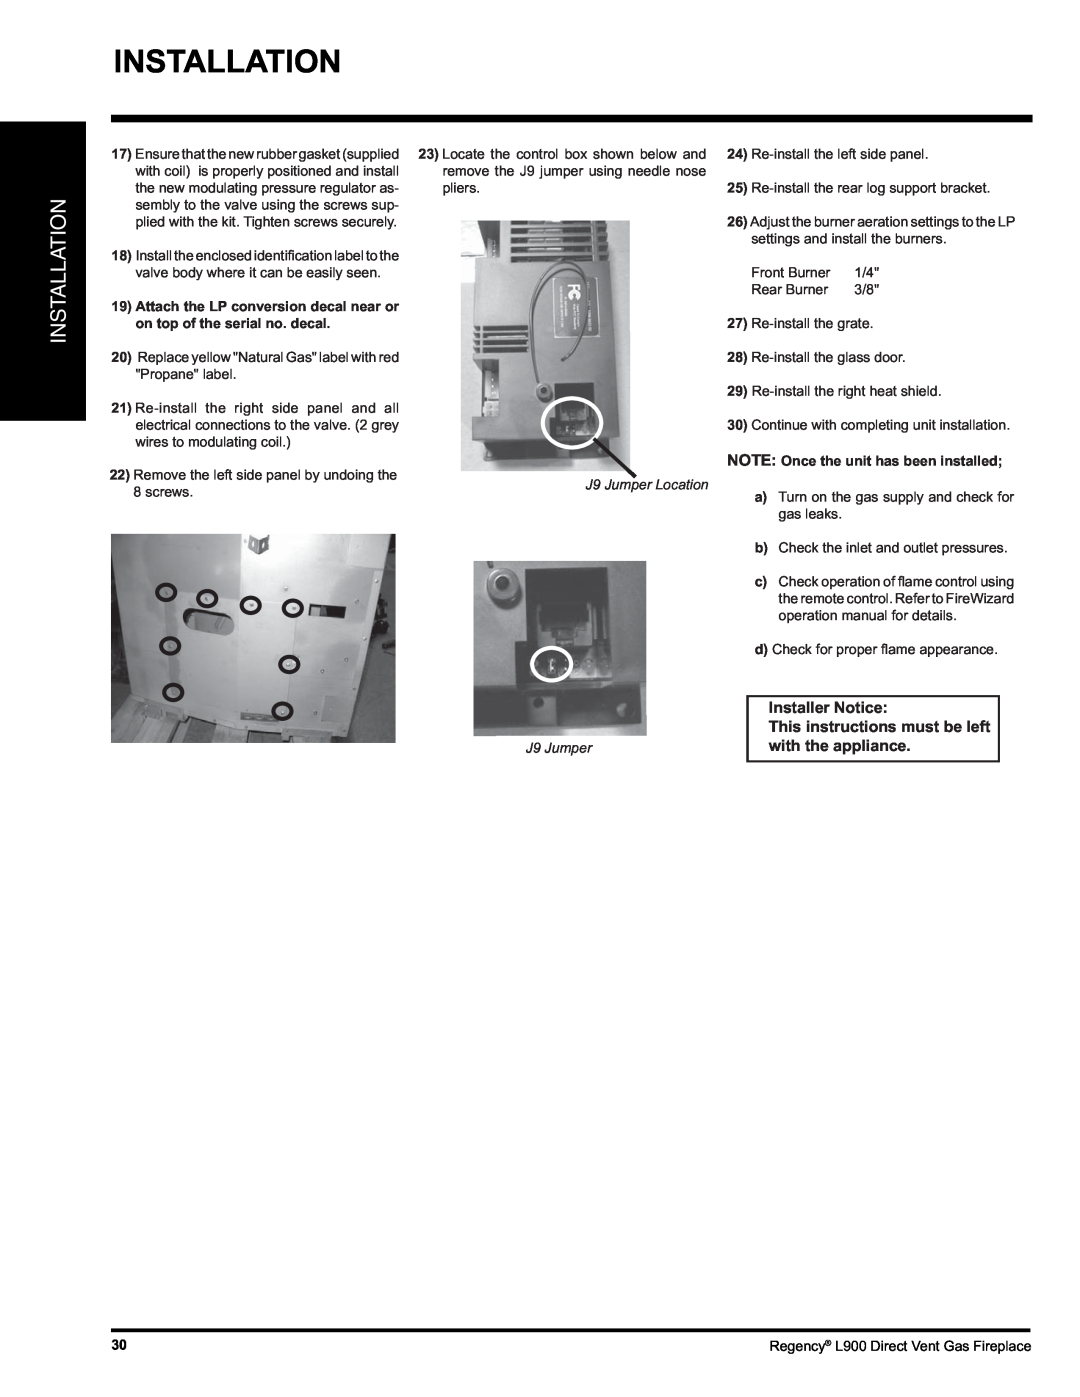 Regency L900-LP, L900-NG Installation, Installer Notice, This instructions must be left with the appliance 